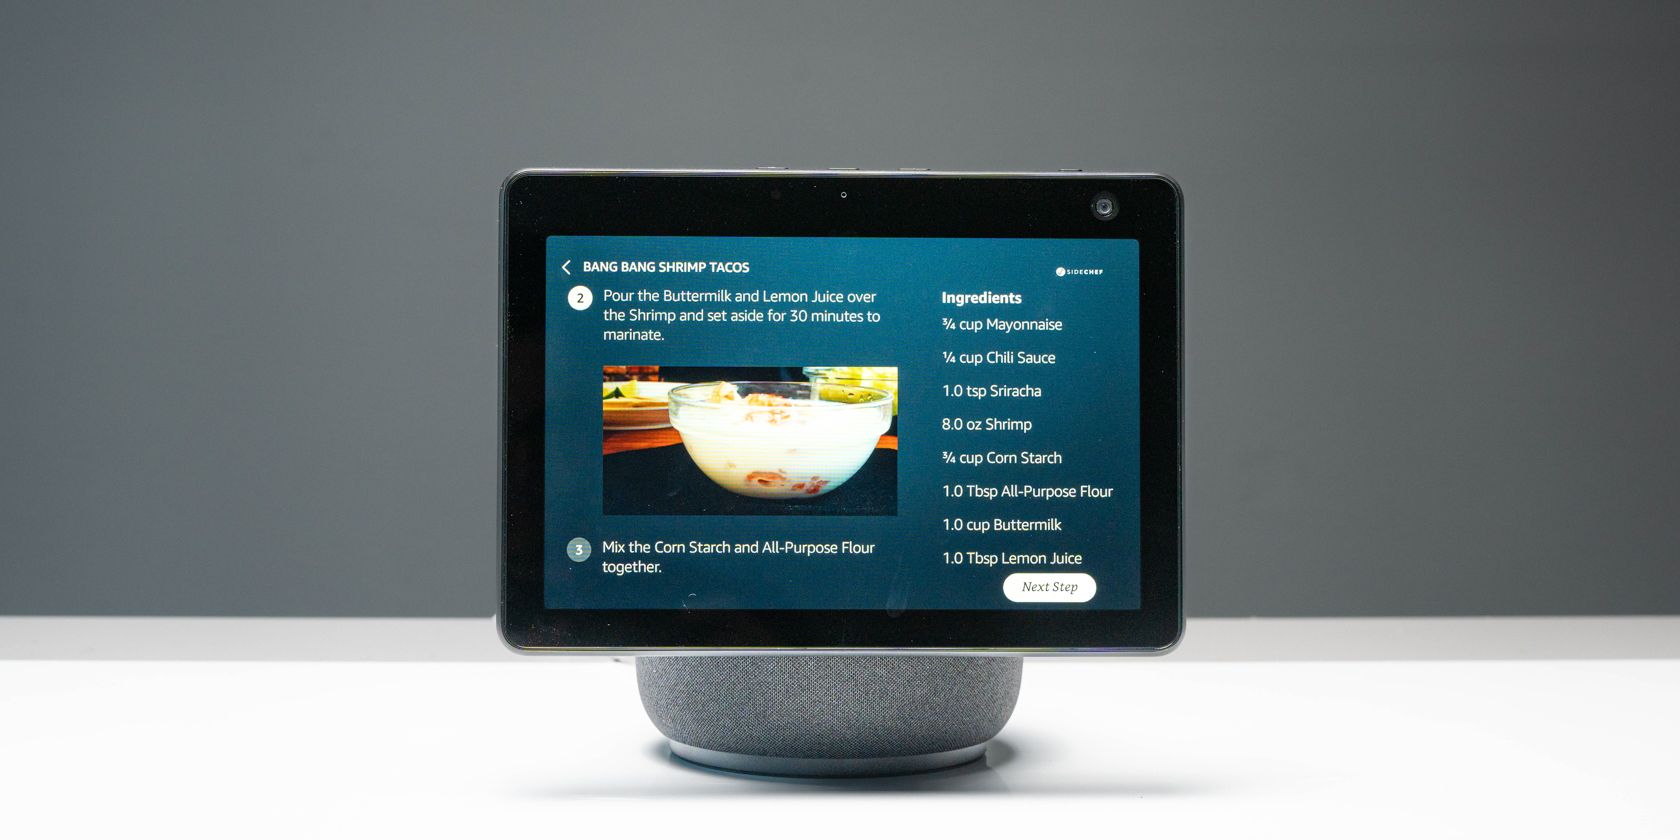 Amazon Echo Show 10 (3rd Gen): The Best All-In-One Smart Display?